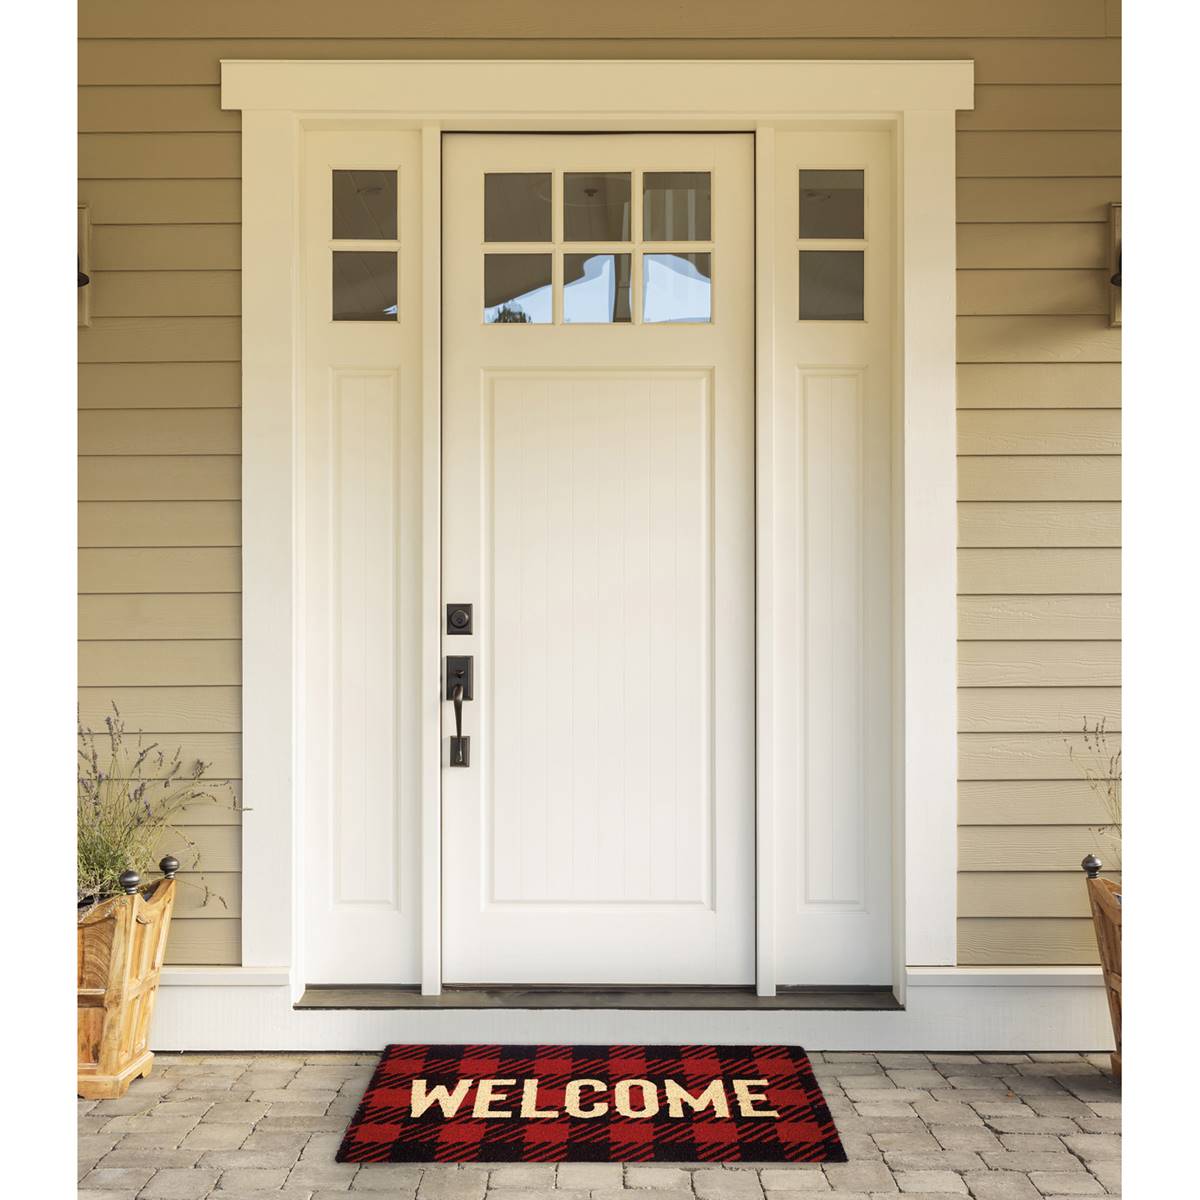 Design Imports Buffalo Check Welcome Doormat